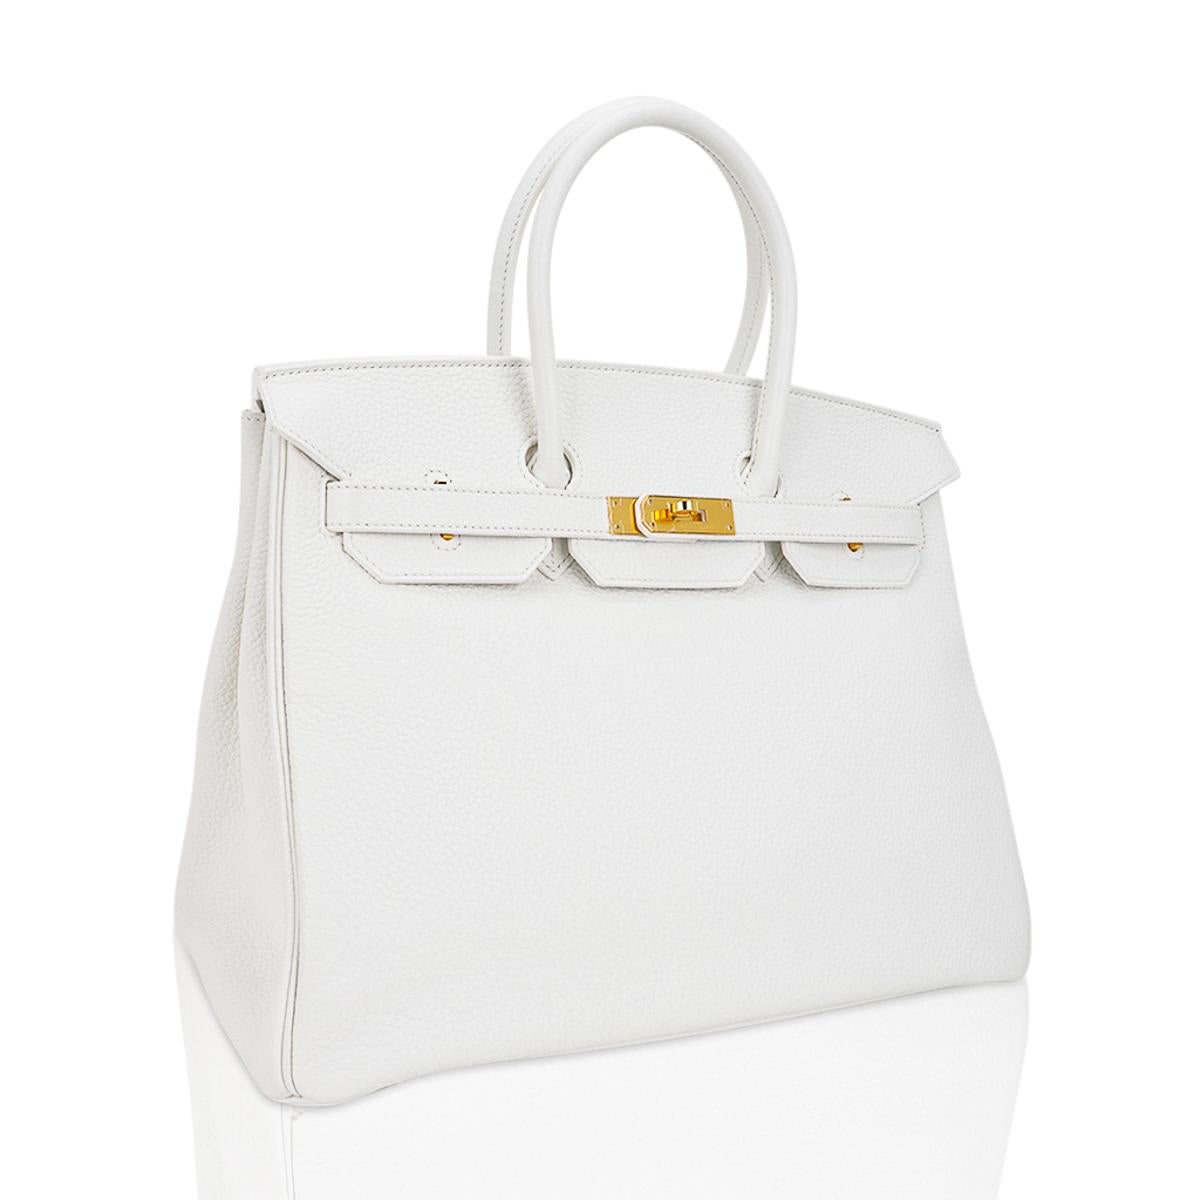 Mightychic offers an Hermes Birkin 35 bag featured in White.
Lush with Gold hardware.
A beautiful year round neutral colour, White is the most rare of all Hermes colours produced in leather.
This Hermes Birkin is created with plush Clemence